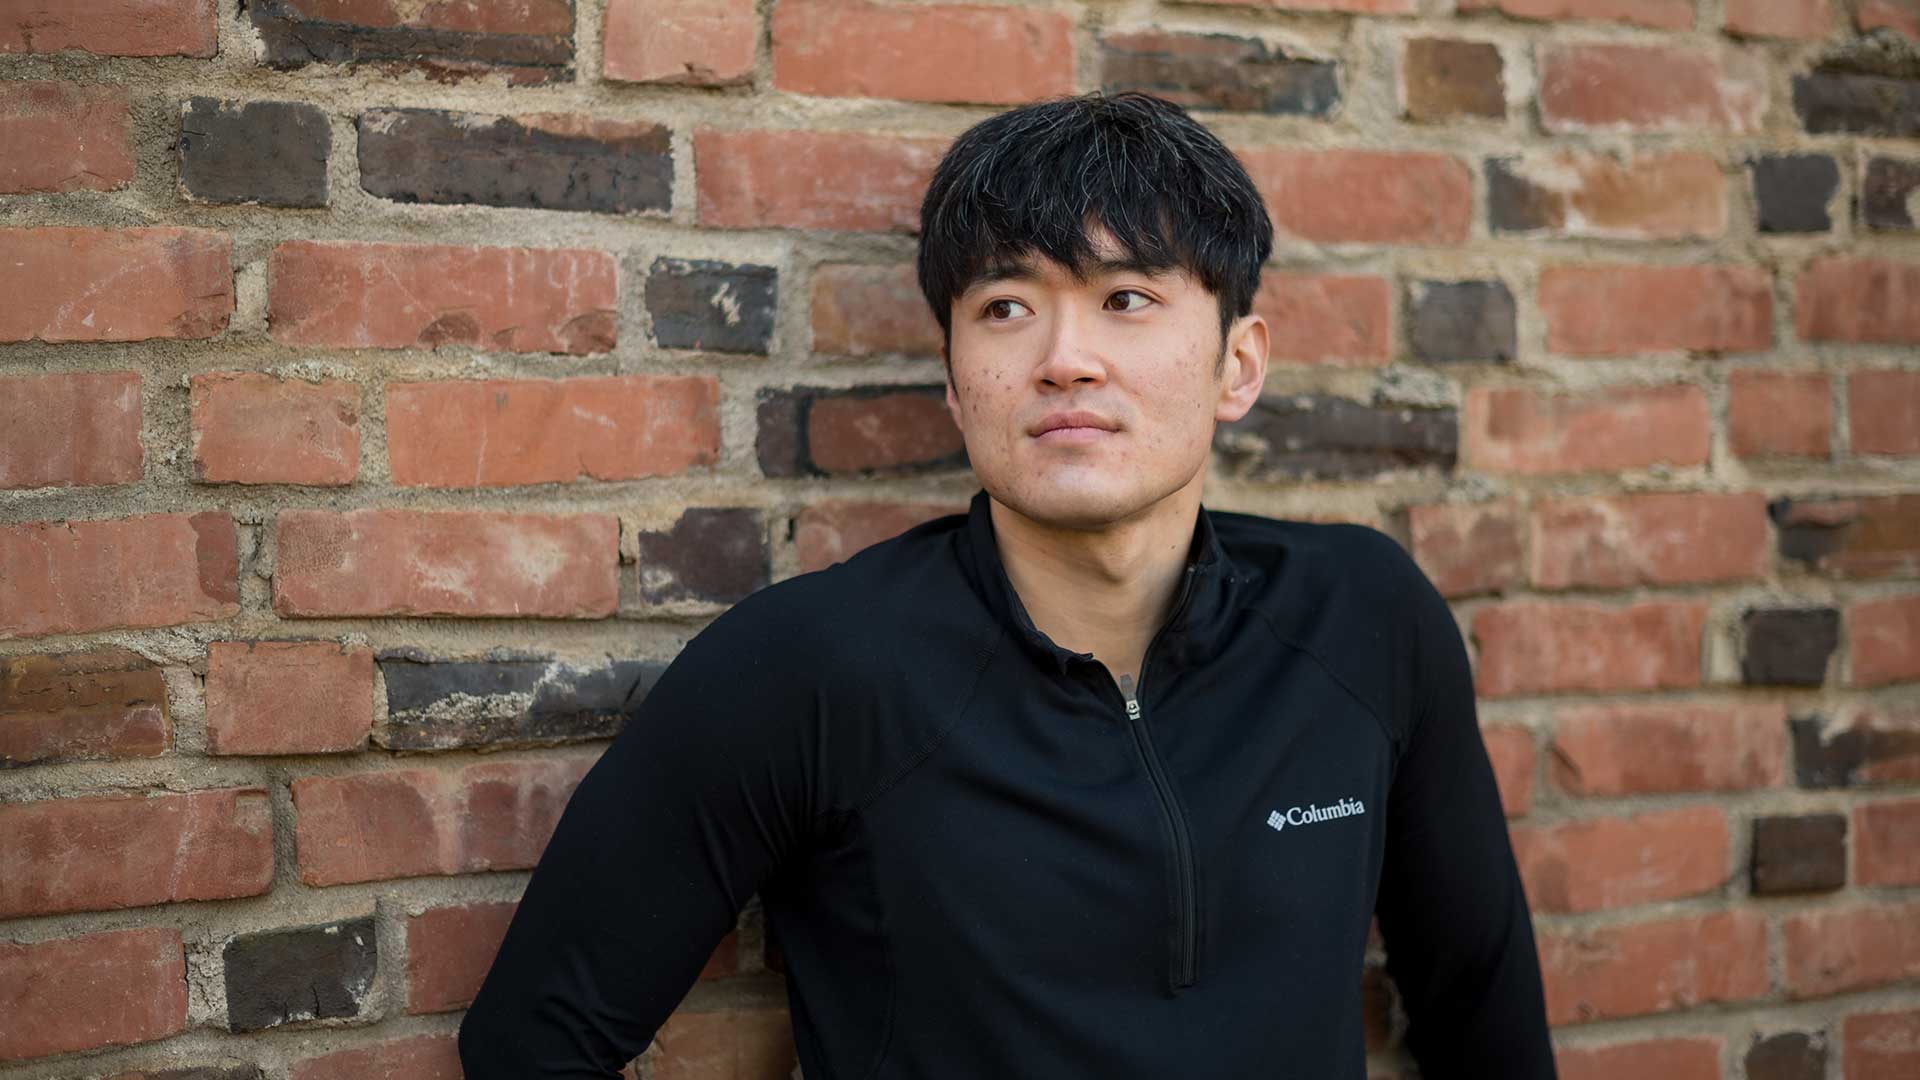 Haeryong Cheong is photographed against a facebrick wall, wearing a black seater.